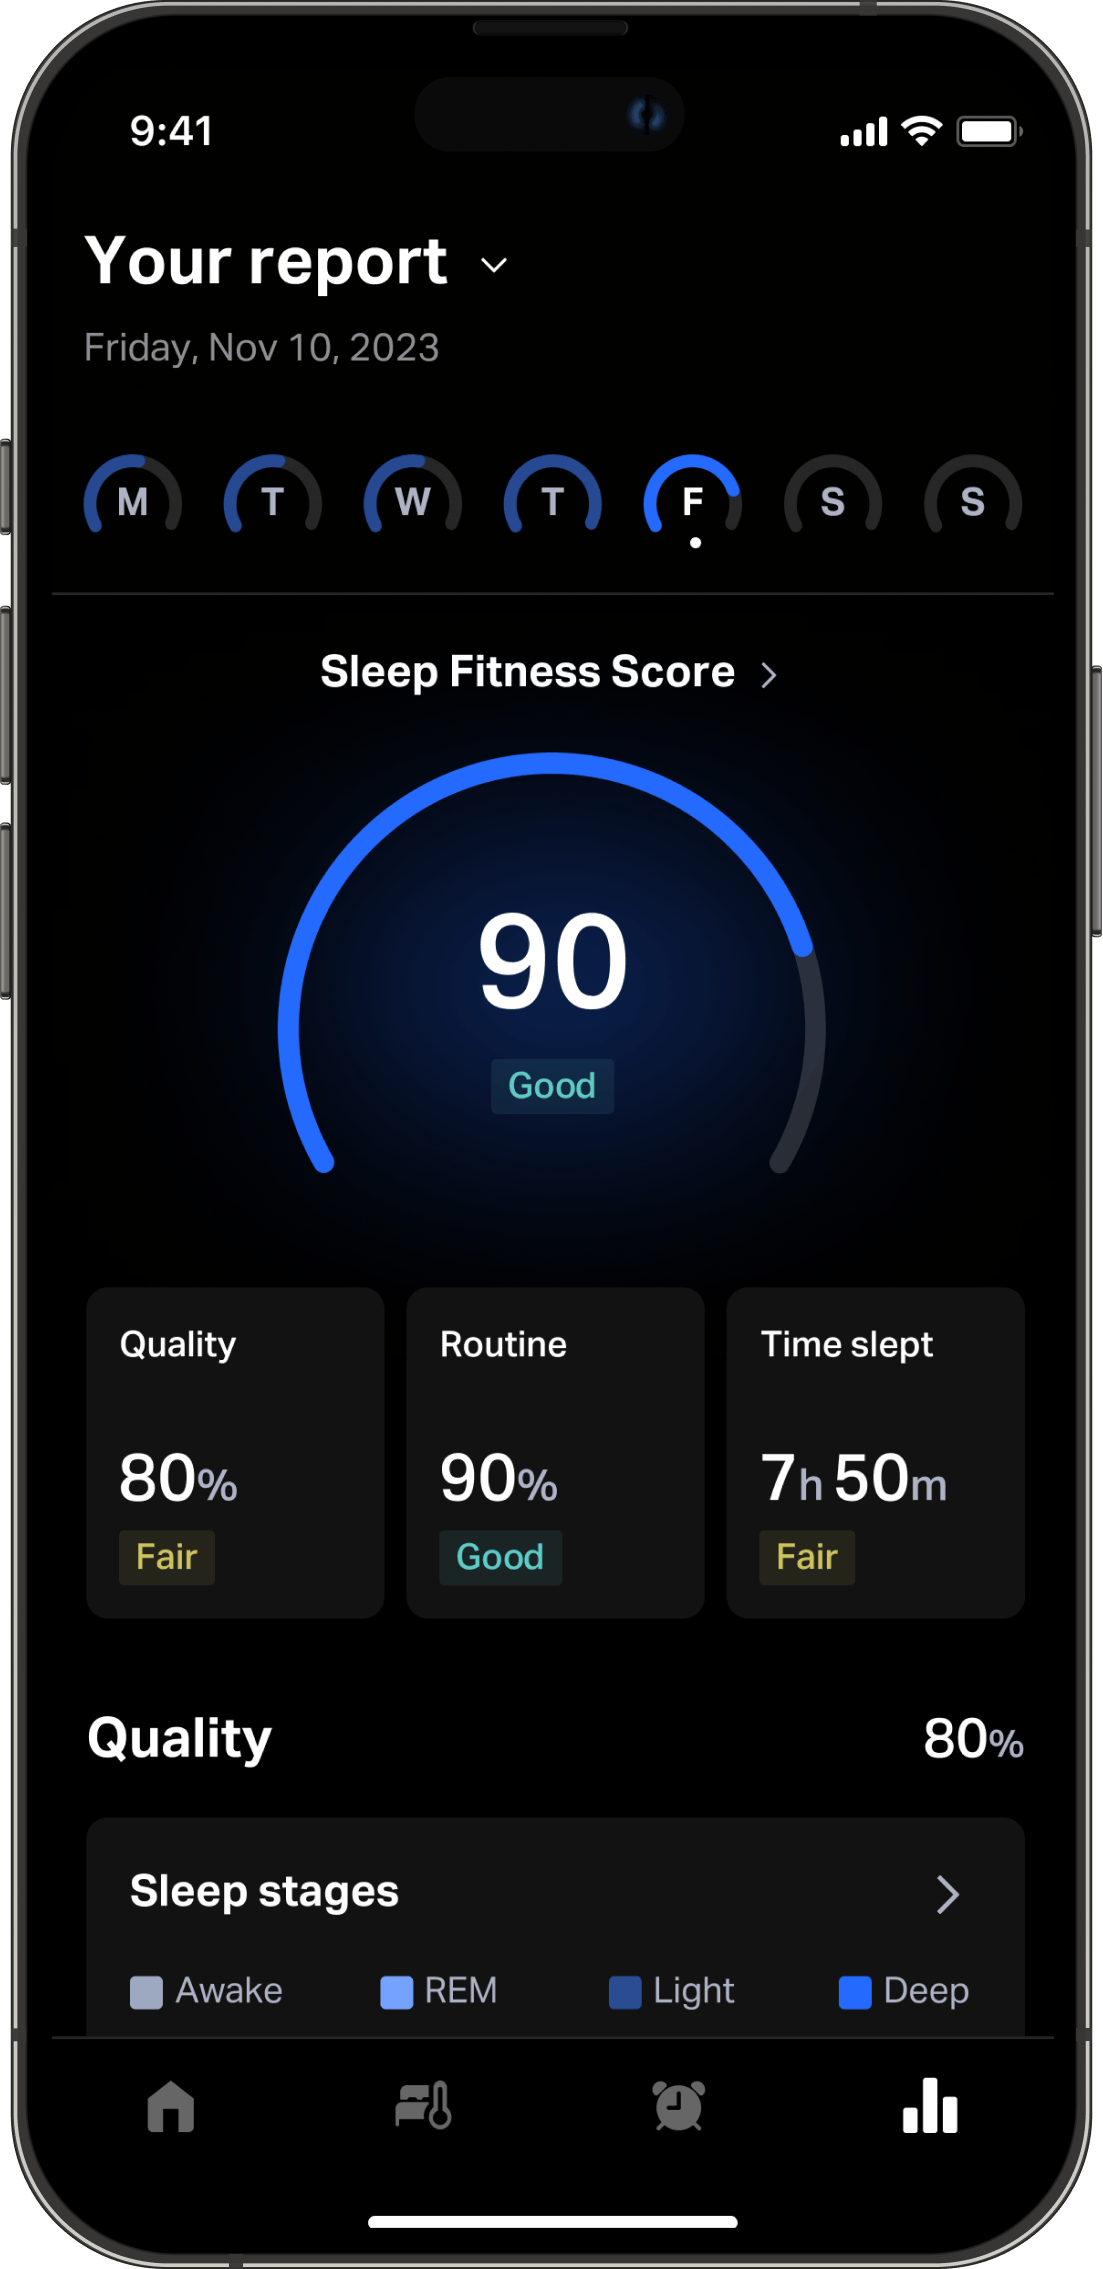 A smartphone with the Eight Sleep App dashboard showing a Sleep Fitness Score of 90